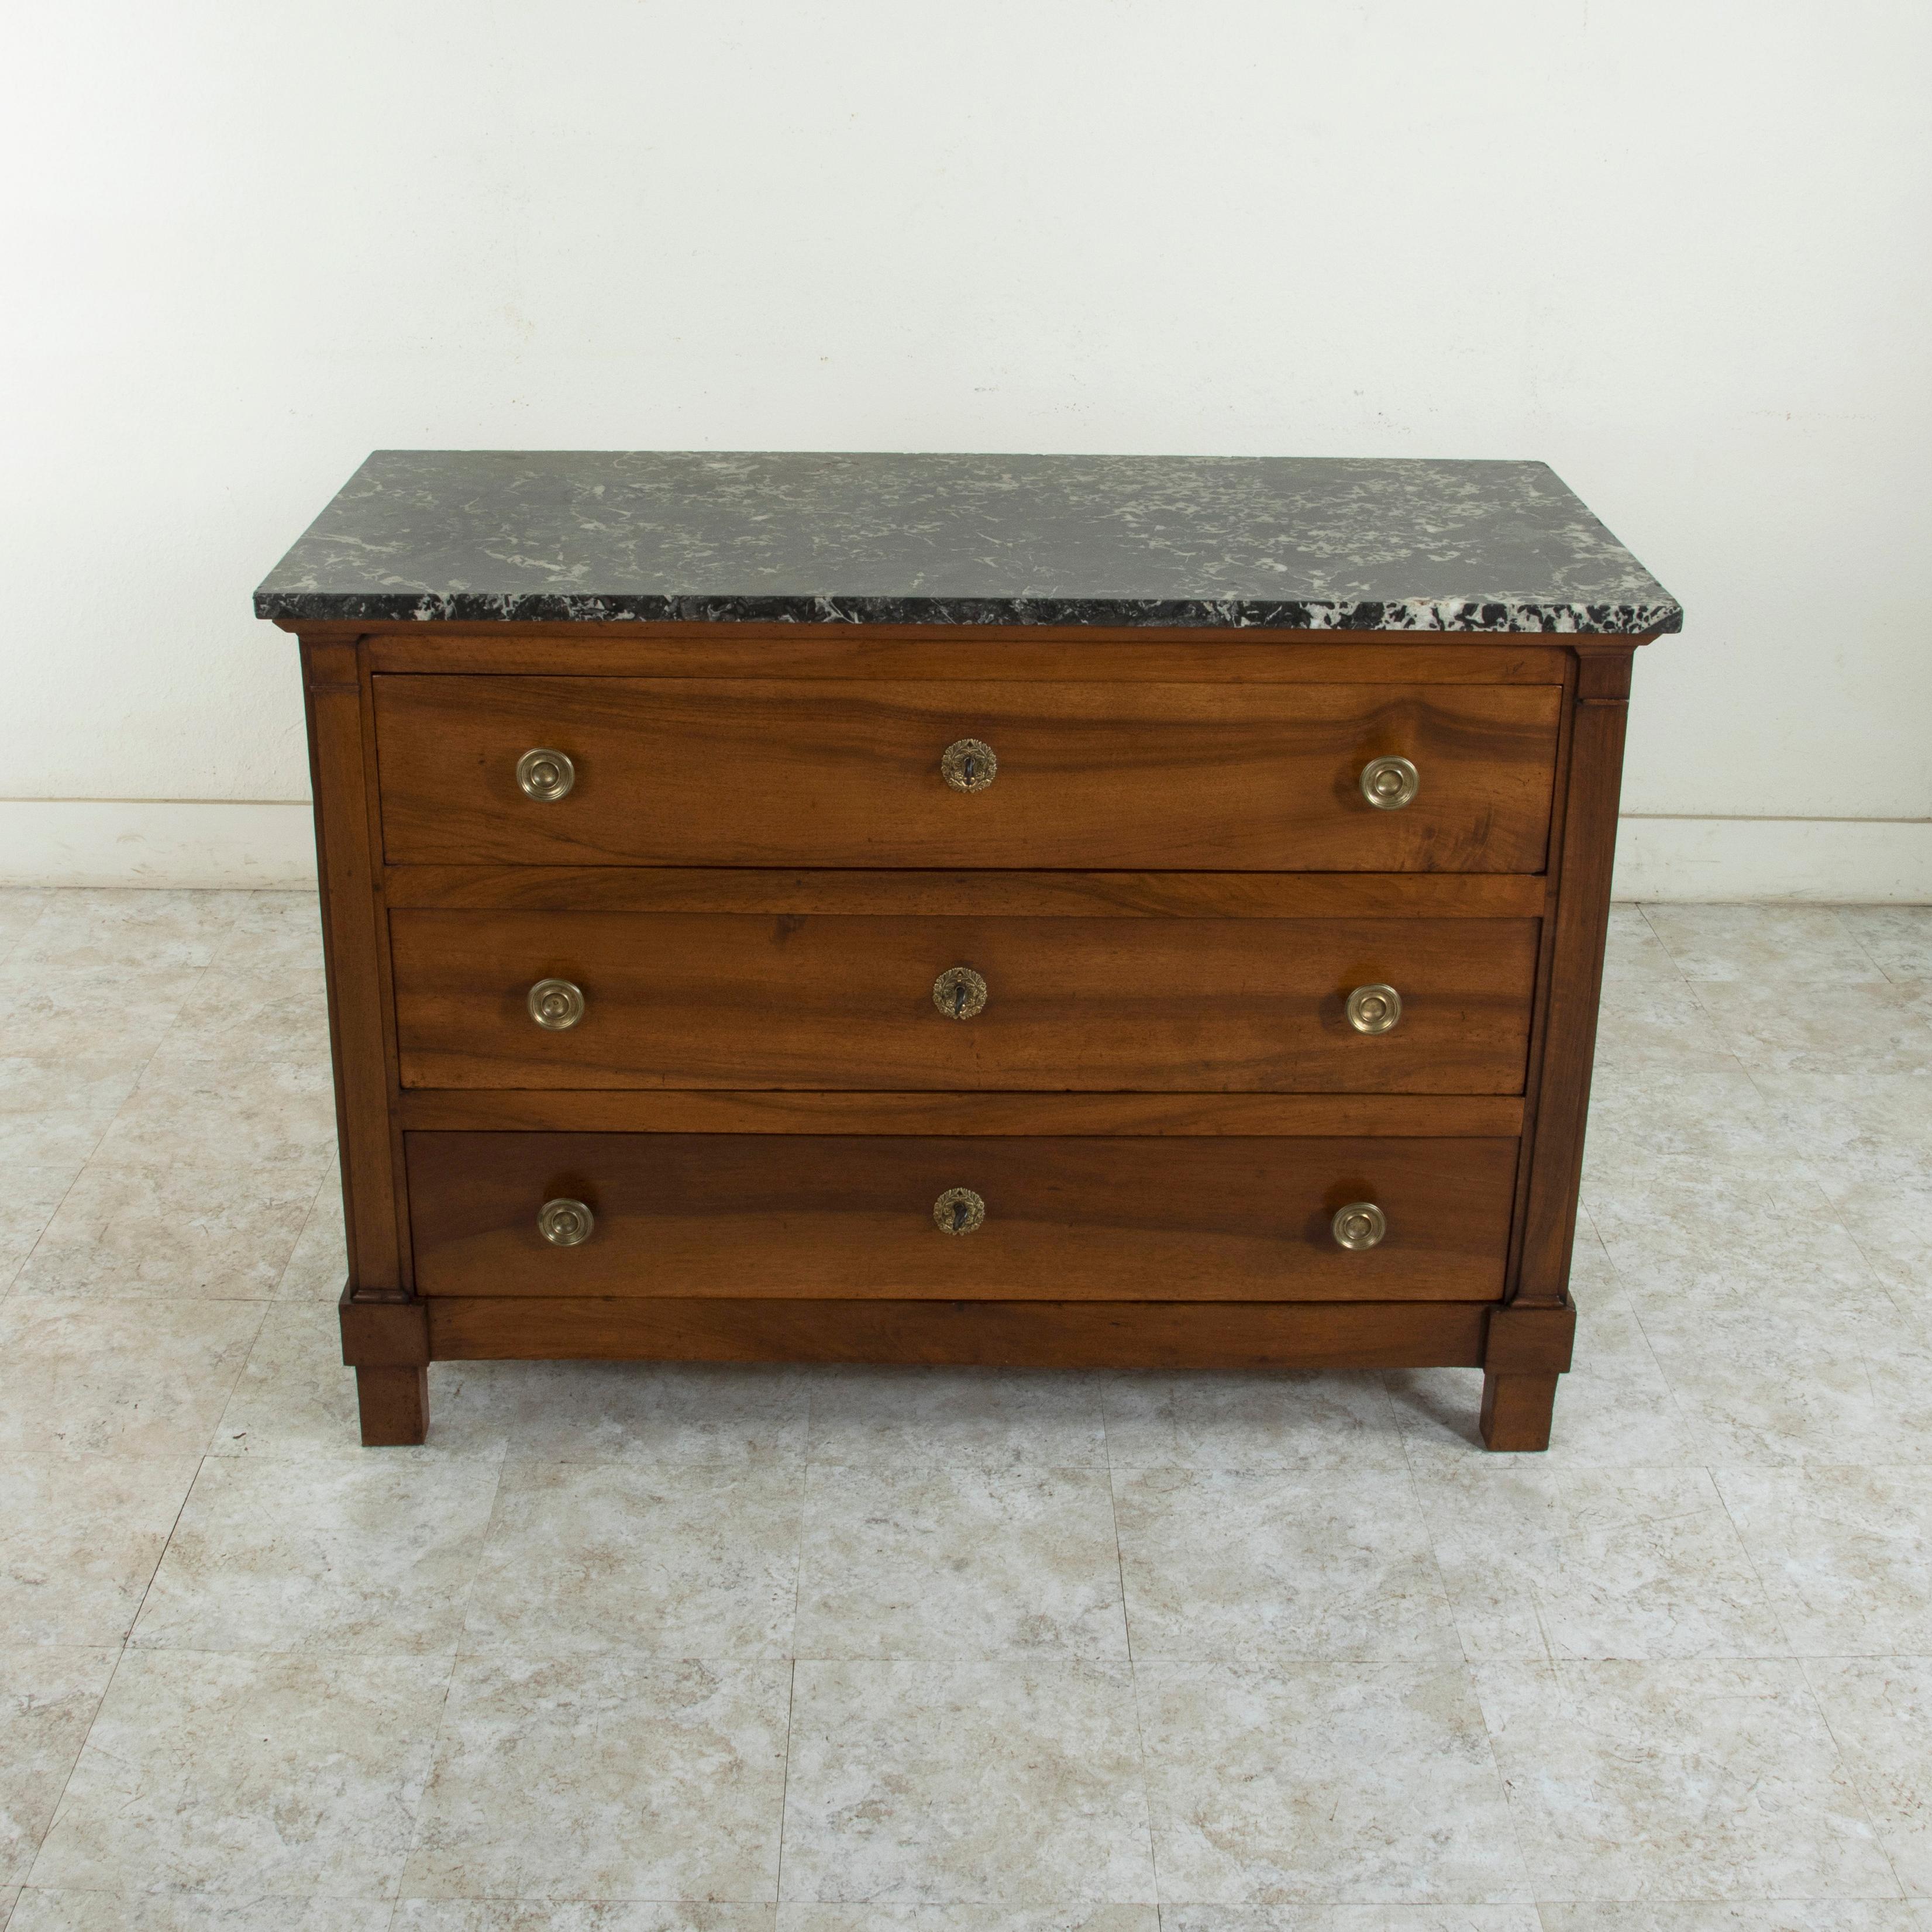 Early 19th Century French Restauration Period Walnut Commode, Chest, Marble Top (Französisch)